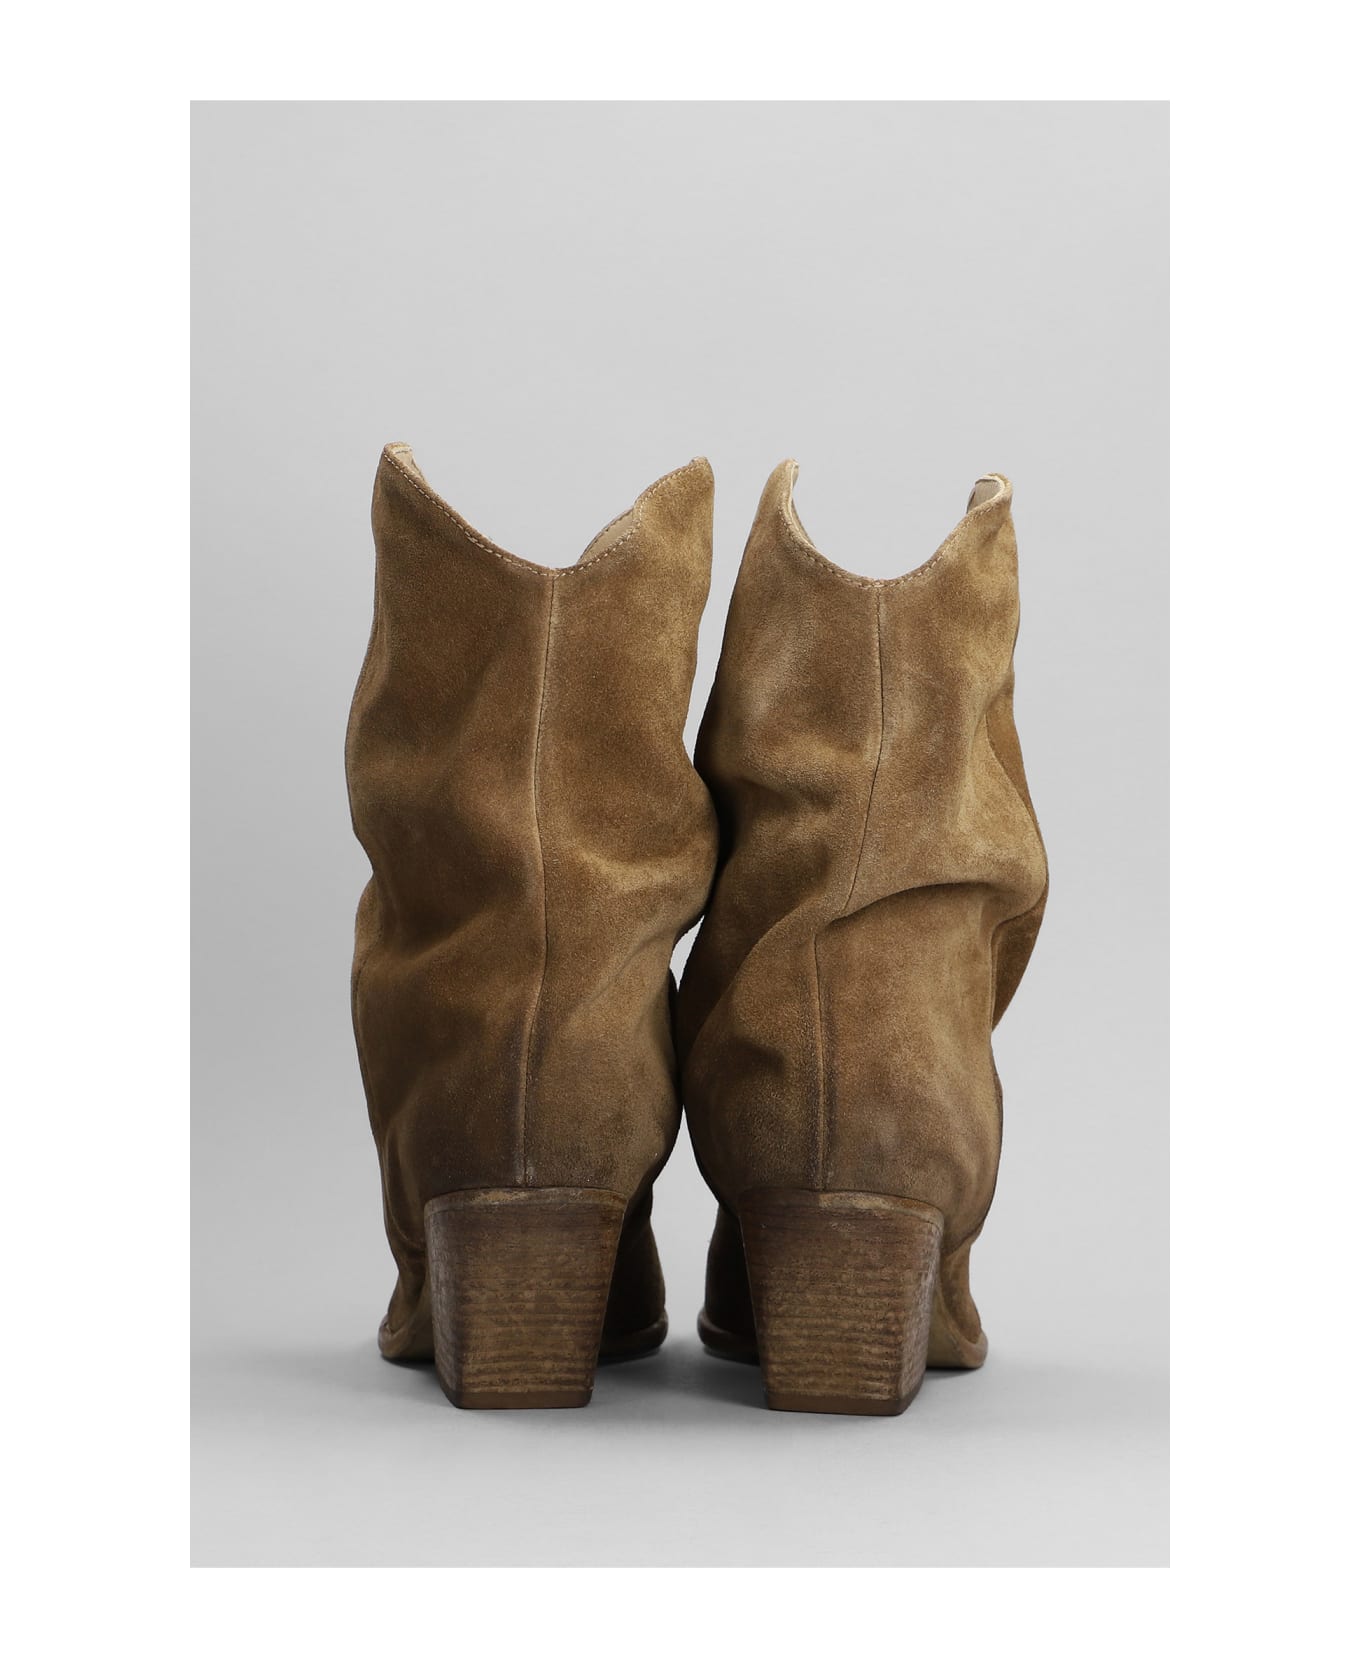 Elena Iachi Low Heels Ankle Boots In Camel Suede - Camel